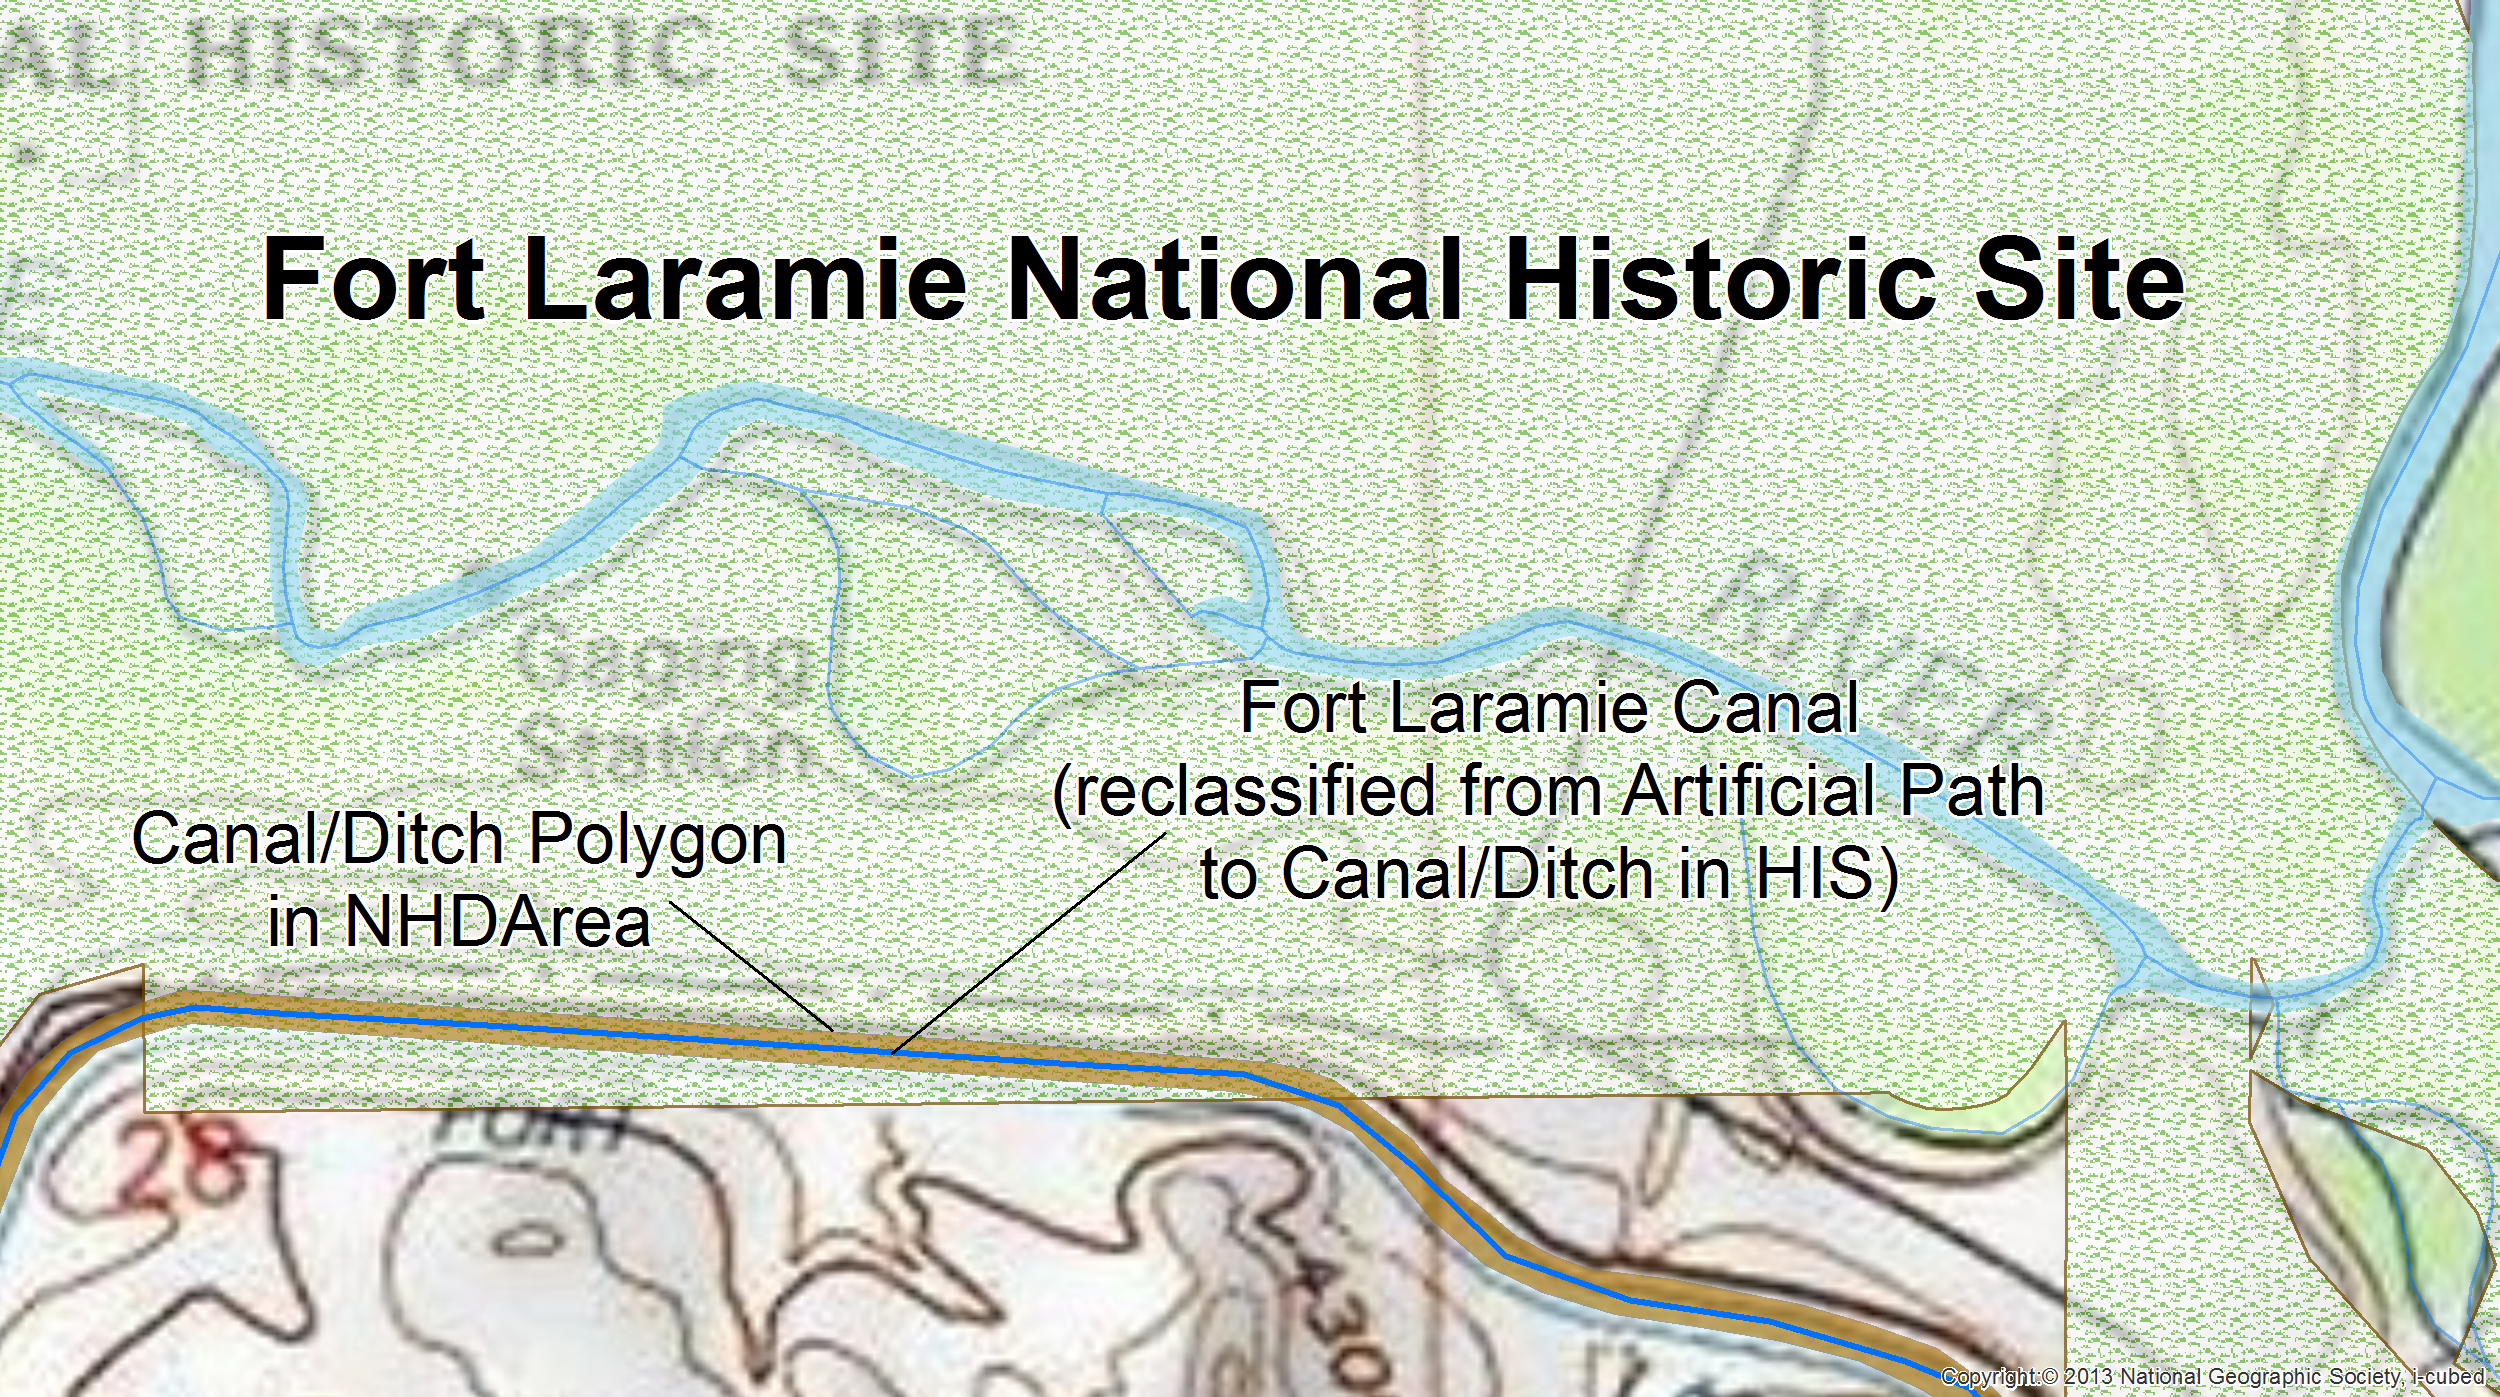 A canal runs through the southern portion of Fort Laramie National Historic Site. The artificial path (blue) that represents the Fort Laramie Canal was reclassified as a canal to obtain the appropriate canal mileage.